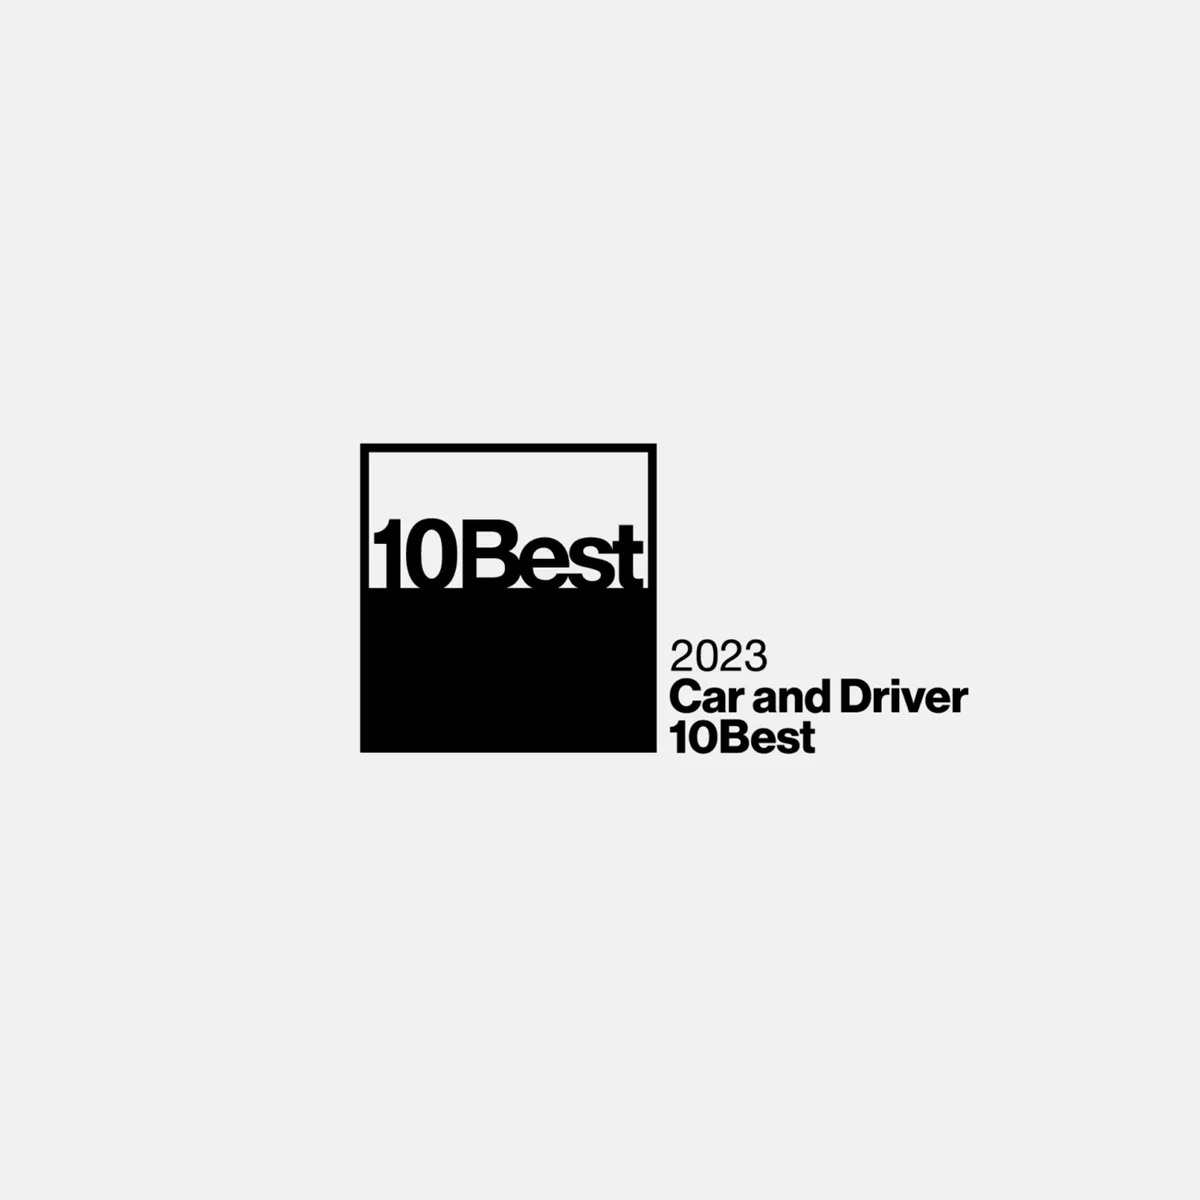 10 Best 2023 Car and Driver 10 best.